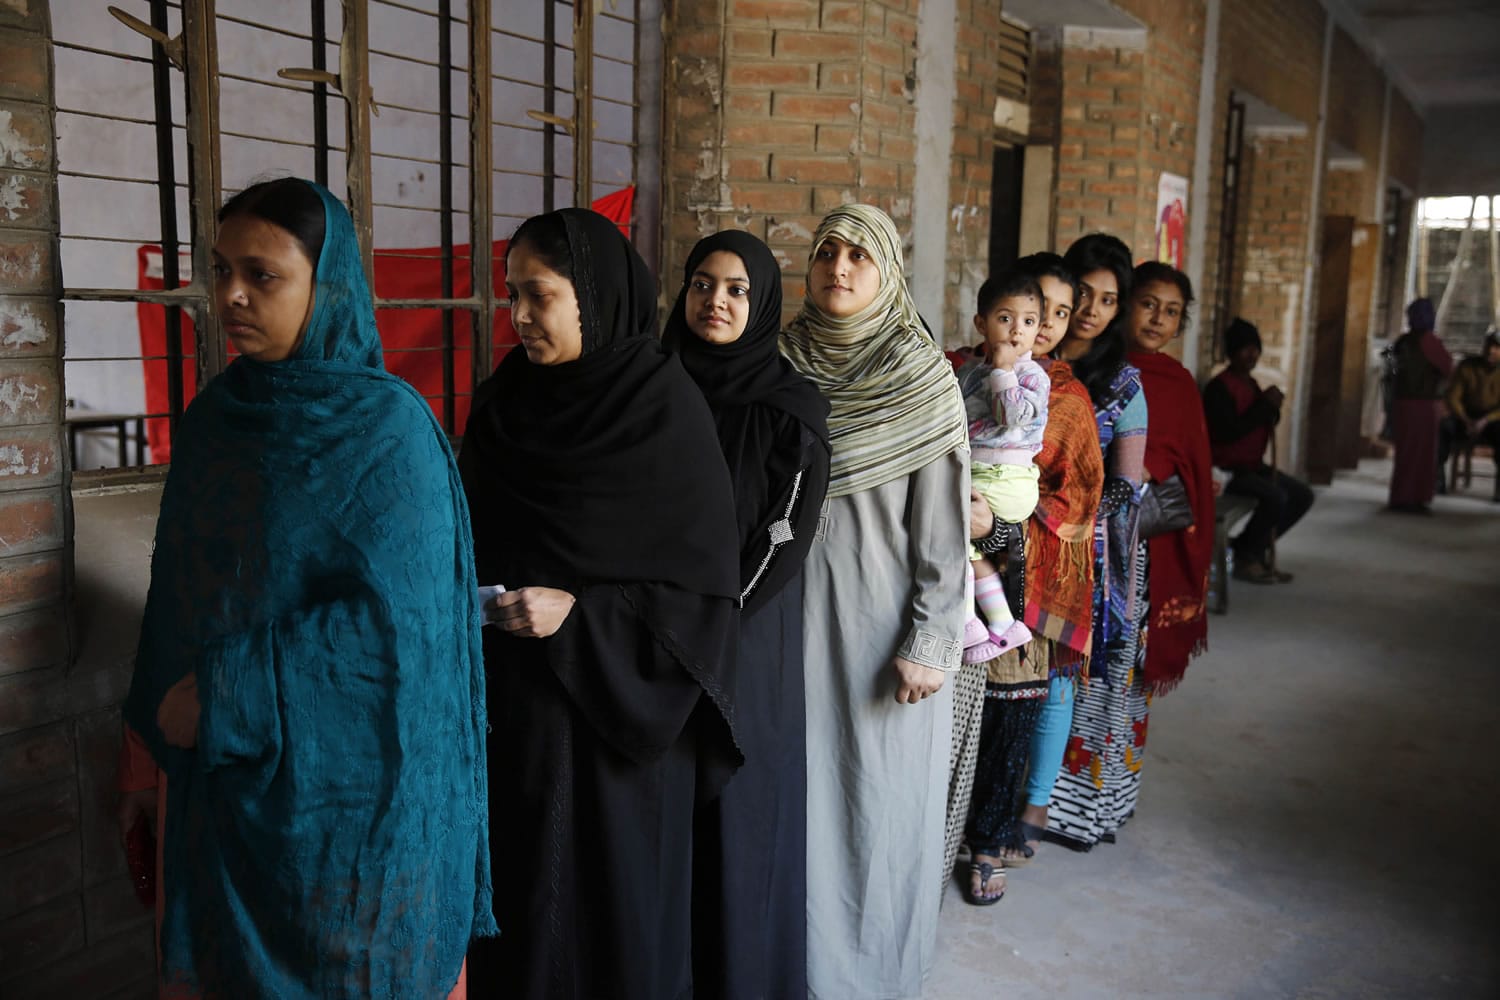 Bangladeshi women stand in a queue to cast their vote, at a polling station in Dhaka, Bangladesh, Sunday, Jan. 5, 2014. Police in Bangladesh fired at protesters and more than 100 polling stations were torched in Sundayis general elections marred by violence and a boycott by the opposition, which dismissed the polls as a farce.